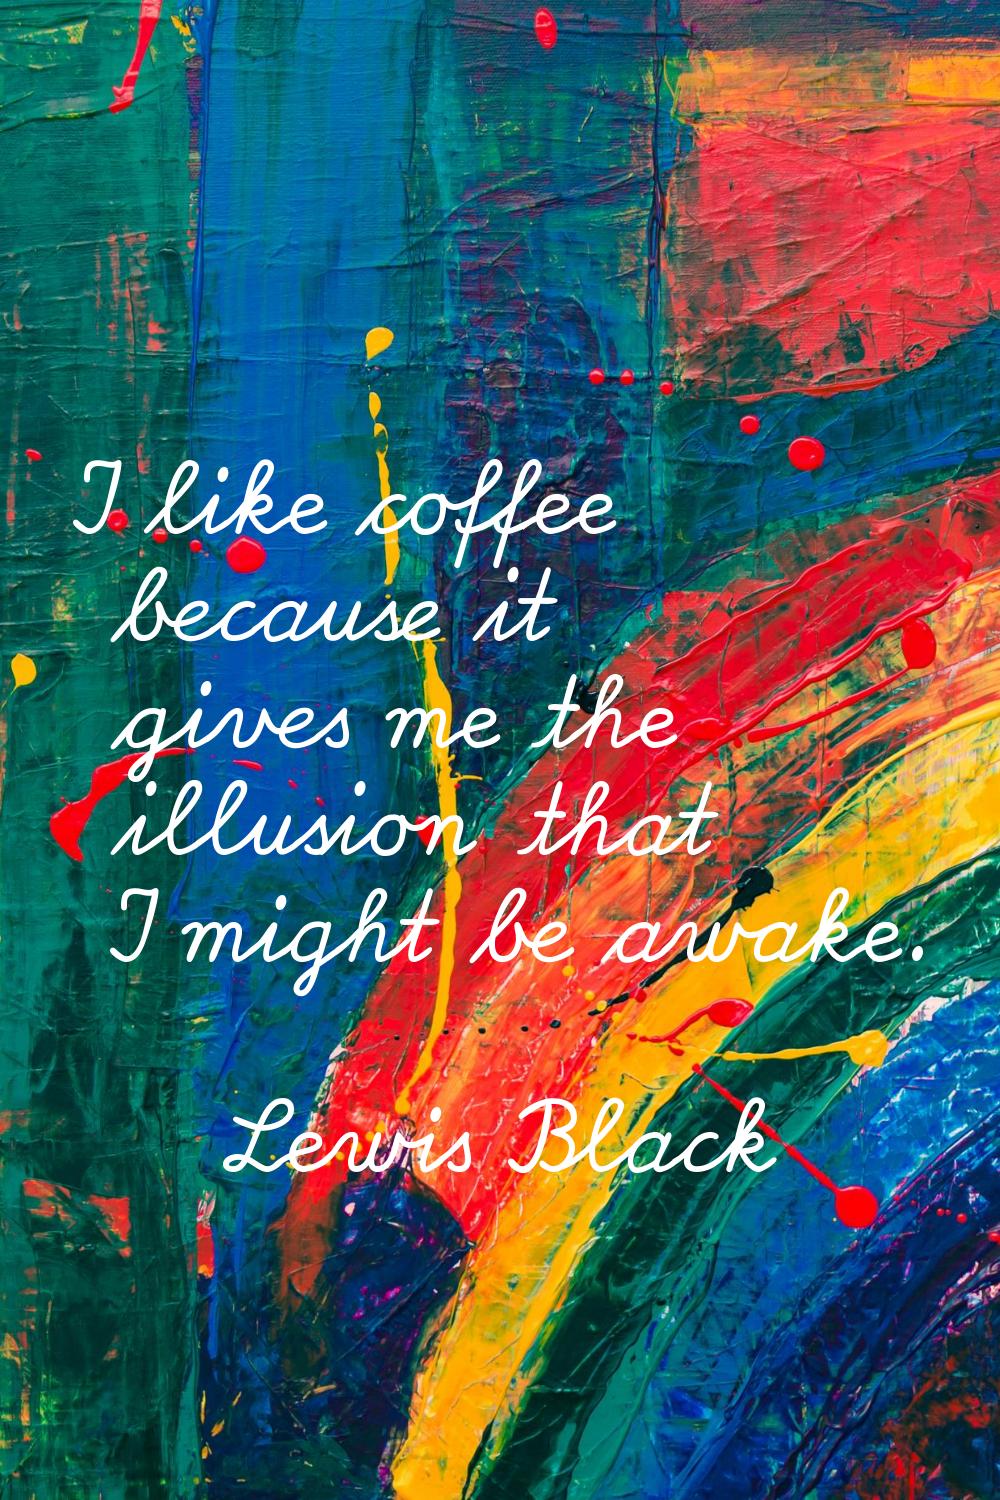 I like coffee because it gives me the illusion that I might be awake.